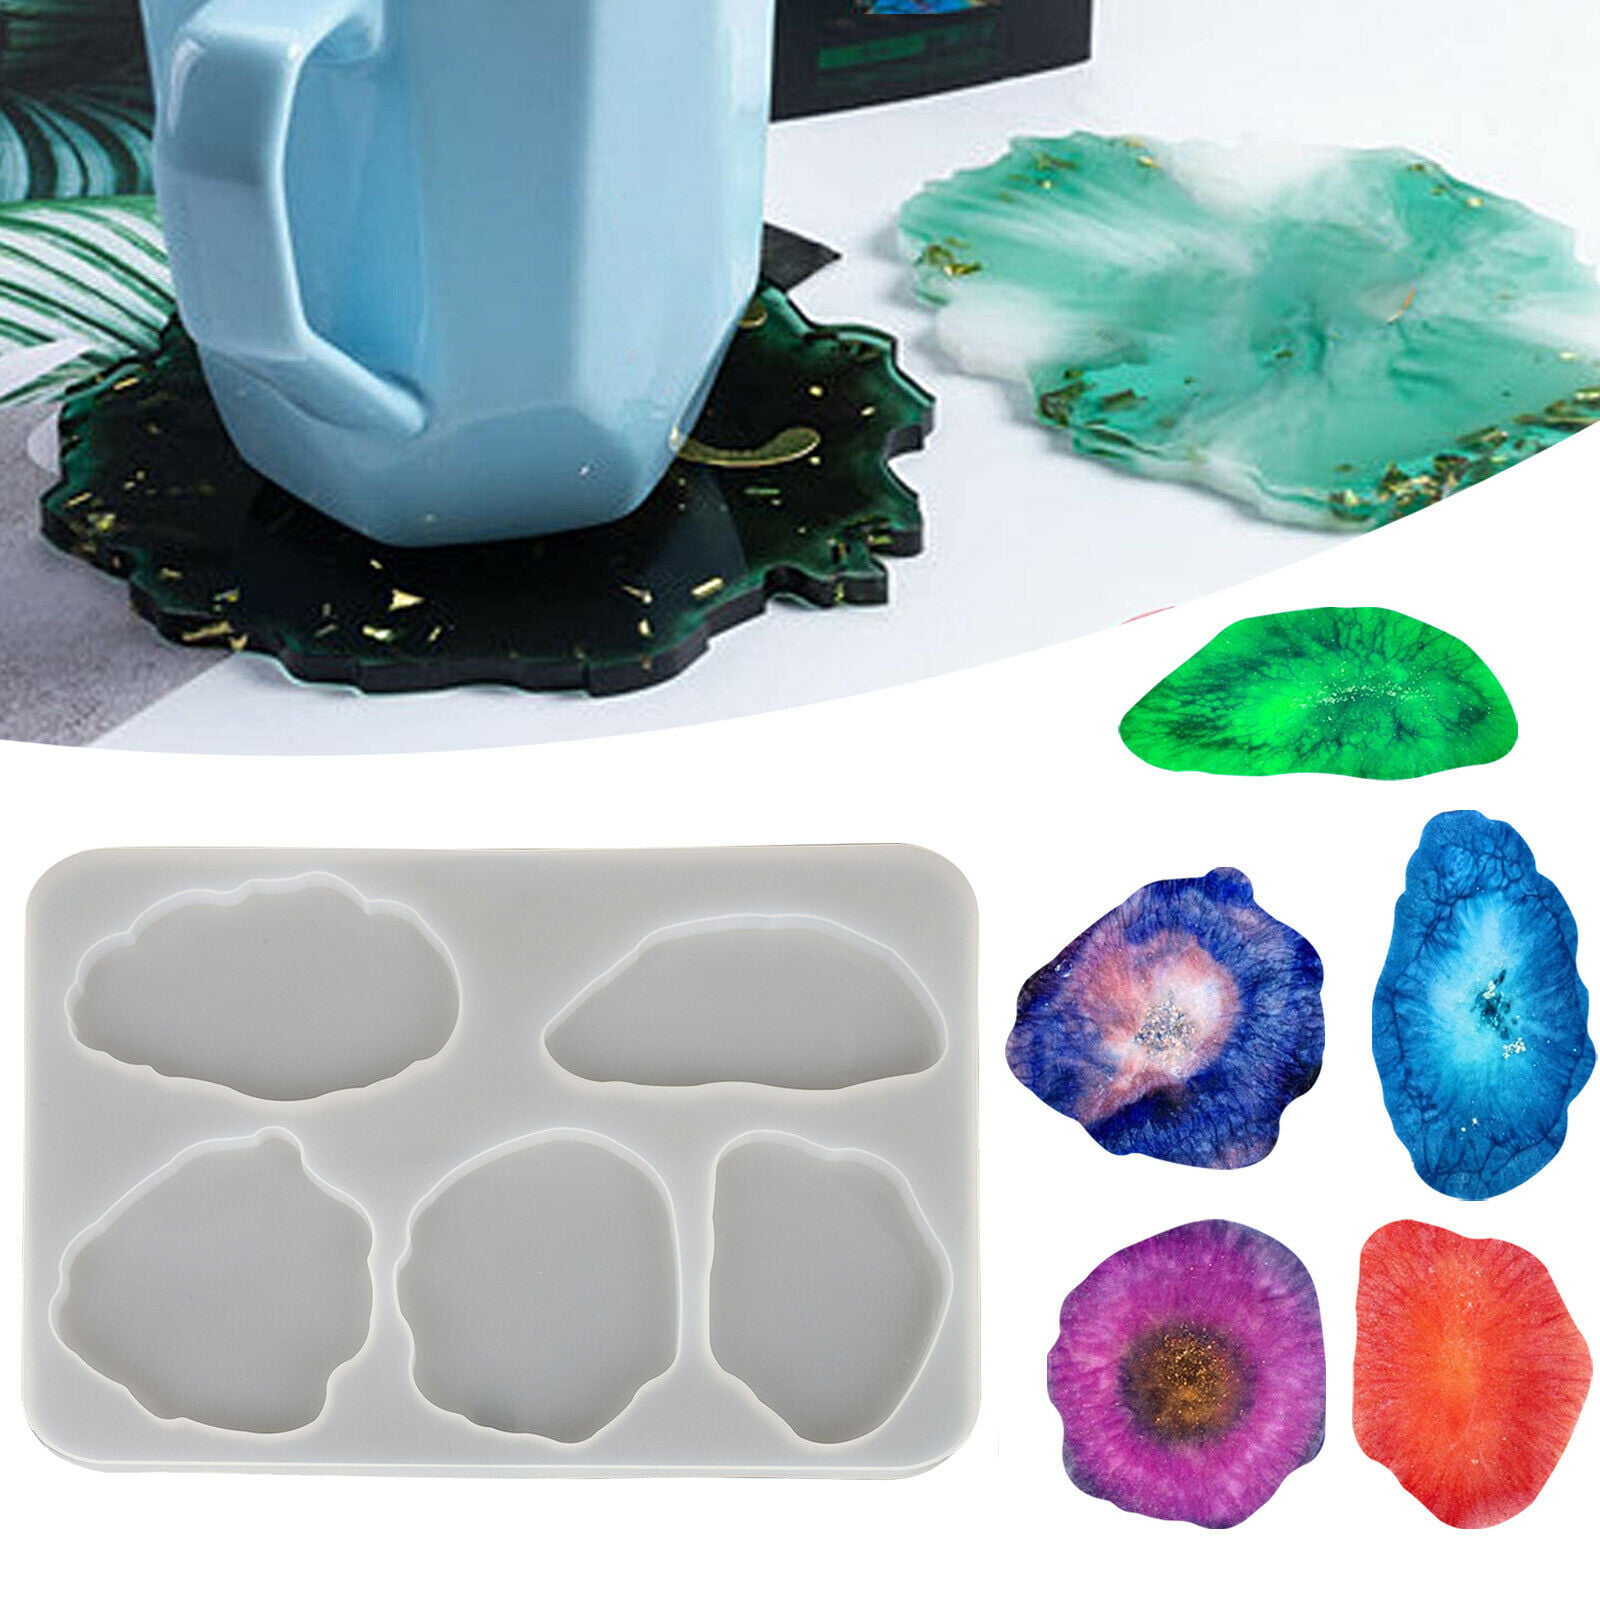 Silicone Coaster Mold Resin Casting Mould Agate Jewelry Clay Making Art DIY Tool